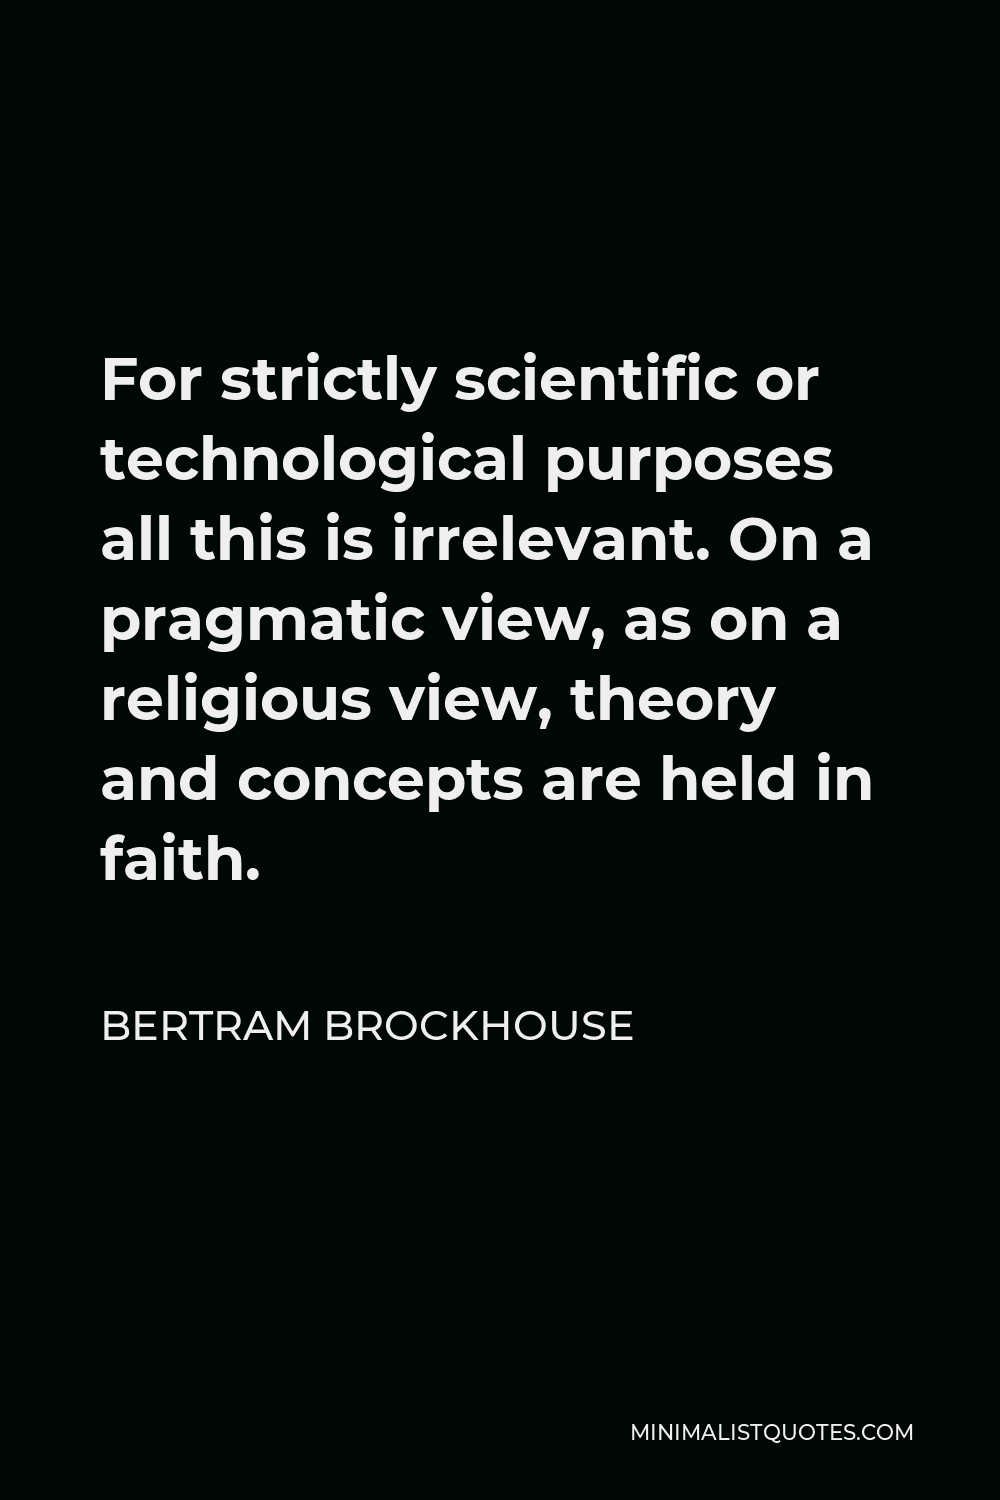 Bertram Brockhouse Quote - For strictly scientific or technological purposes all this is irrelevant. On a pragmatic view, as on a religious view, theory and concepts are held in faith.